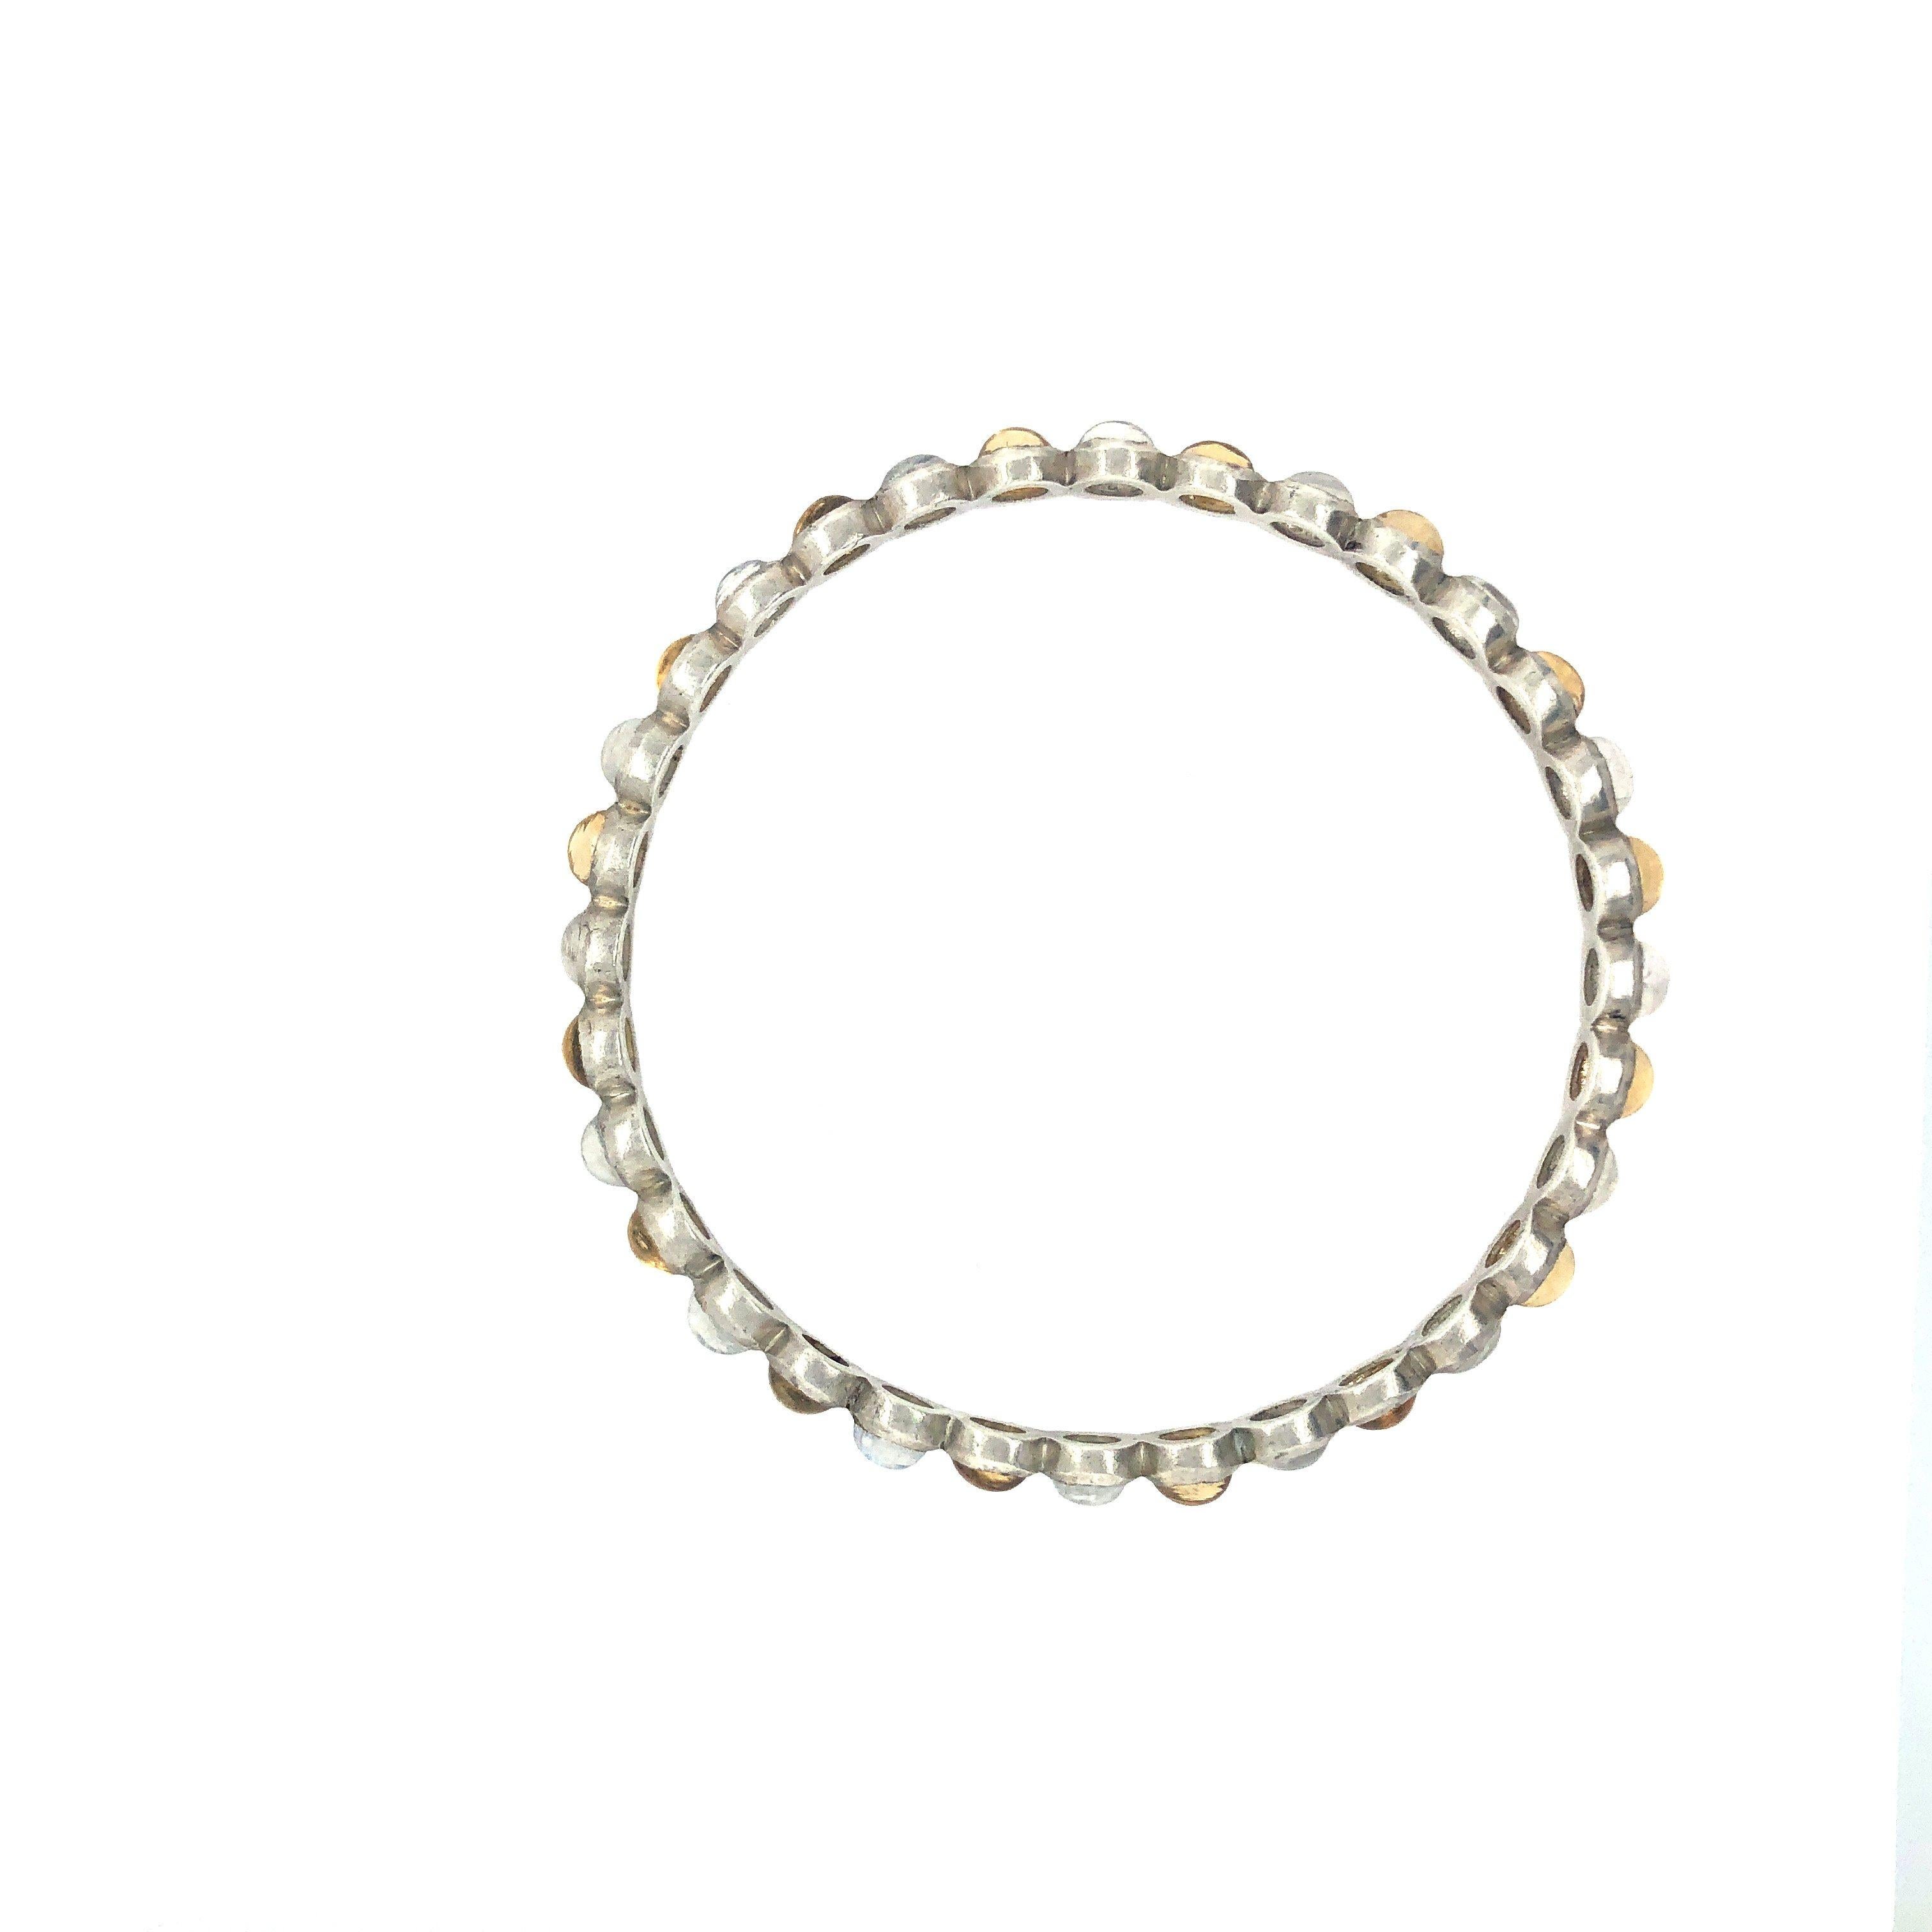 Timeless yet modern, this is a perfect accent, whichever color you choose. Semiprecious stones in a round bangle bracelet

One Size Fits All: Medium, 70mm diameter
Materials: Rainbow Moonstone with Lemon Yellow Citrine and Sterling Silver
